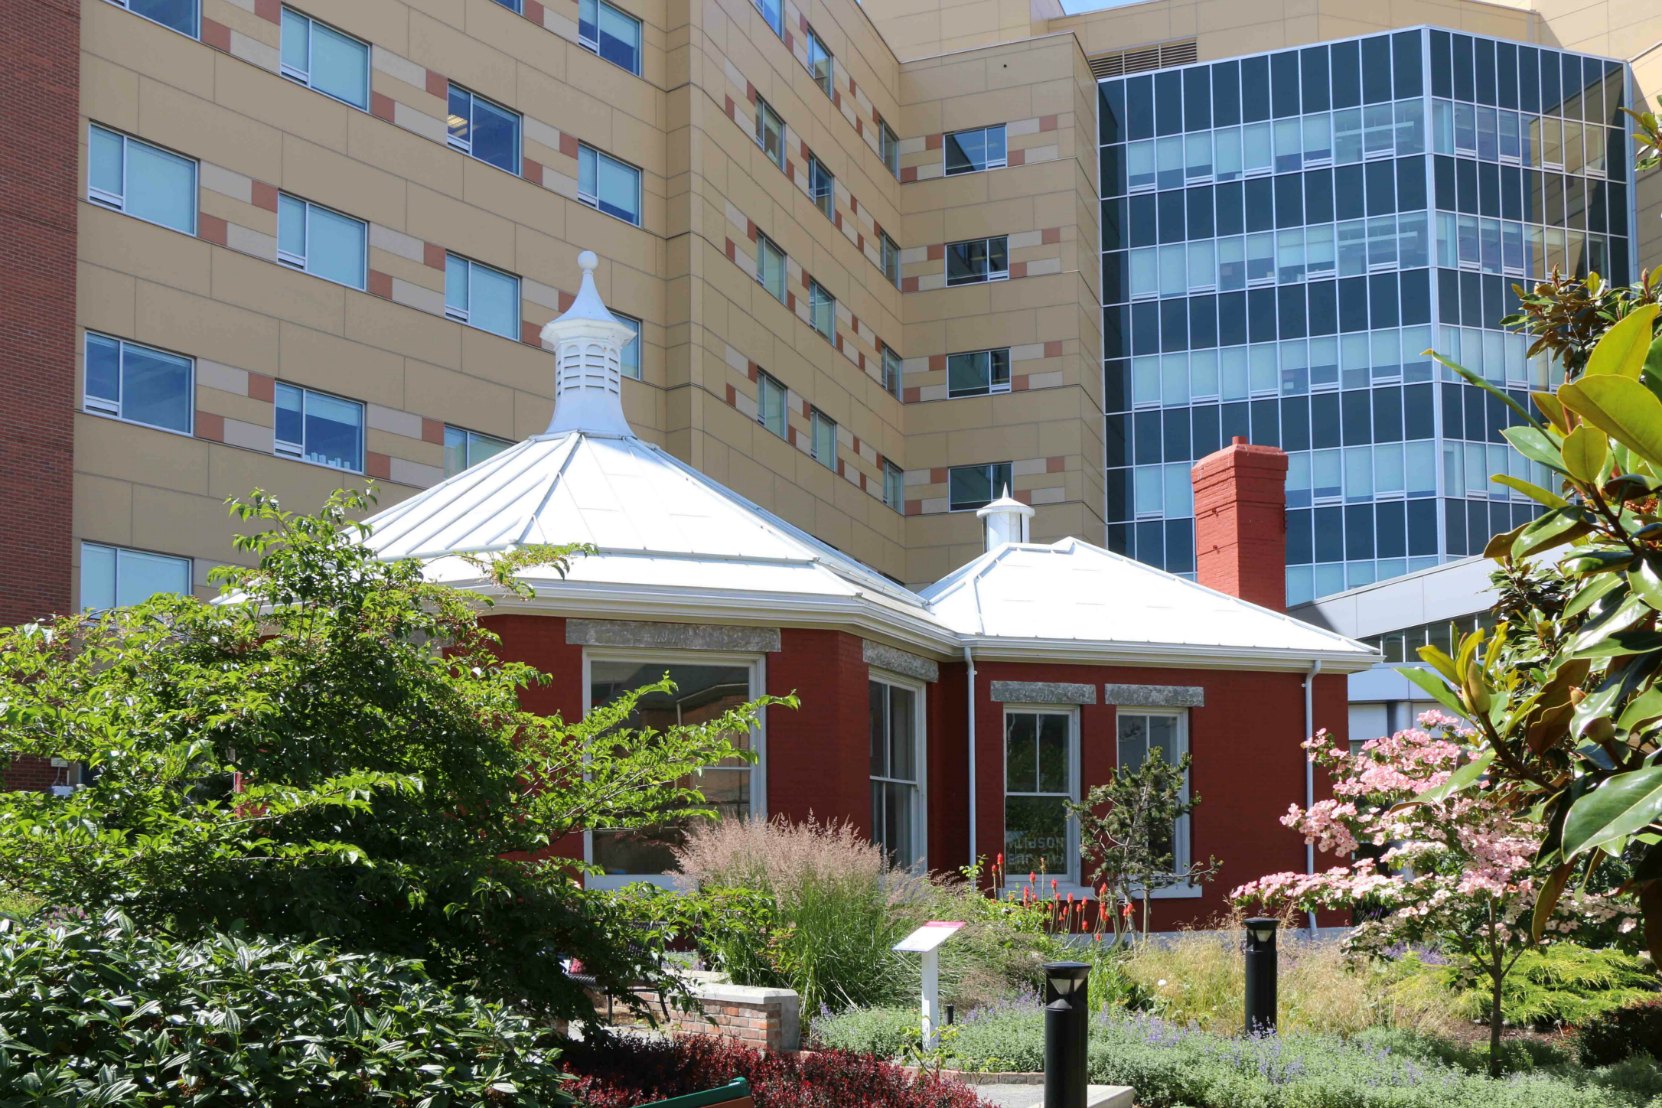 The Pemberton Memorial Operating Room at the Royal Jubilee Hospital was declared a National Historic Site of Canada in 2009.